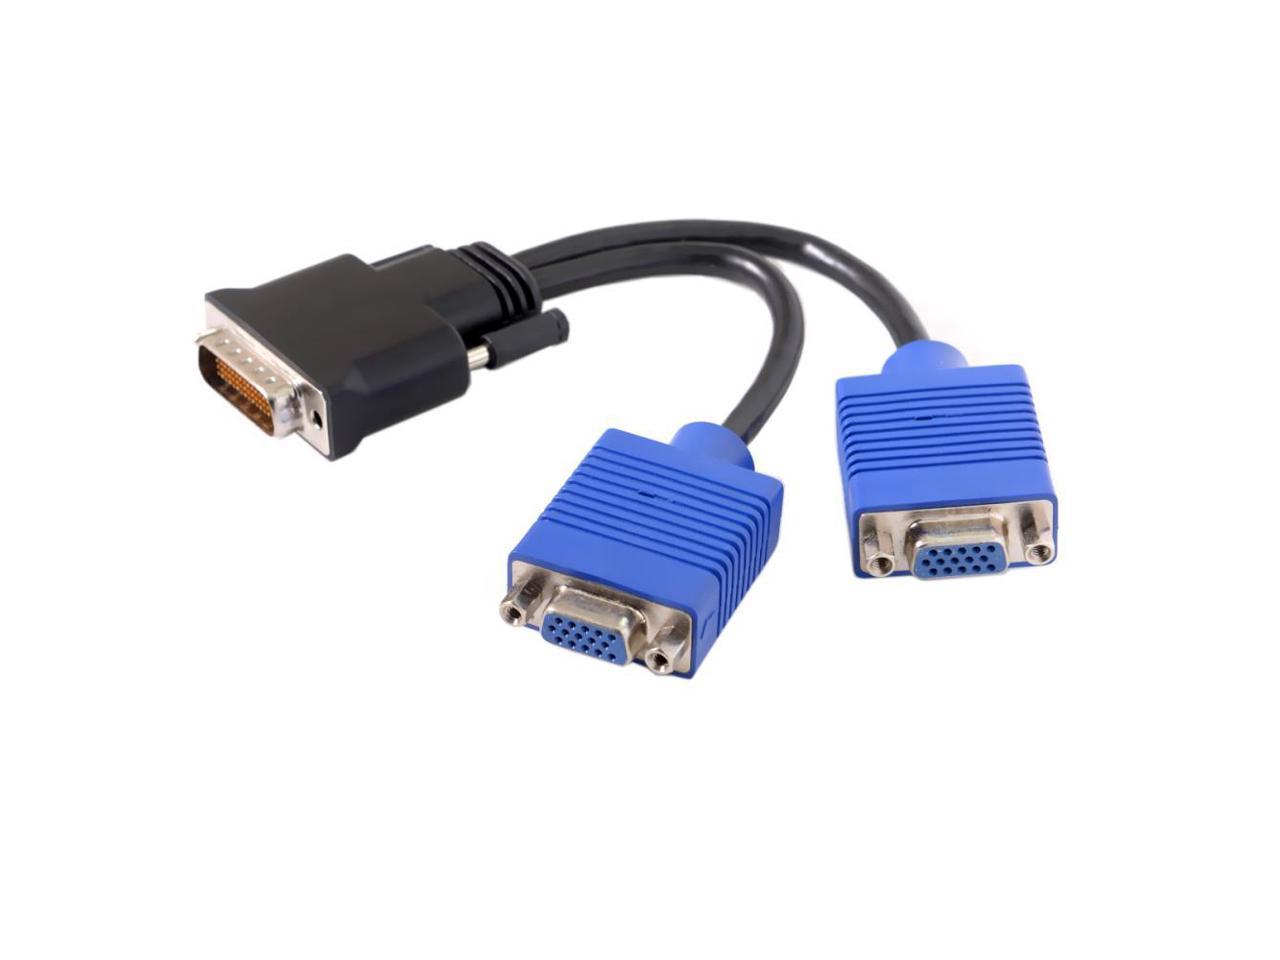 DMS59 PLUG TO TWIN 15 PIN SOCKET EXTENSION CABLE FOR PCA VGA RGD VIDEO CARDS ETC 